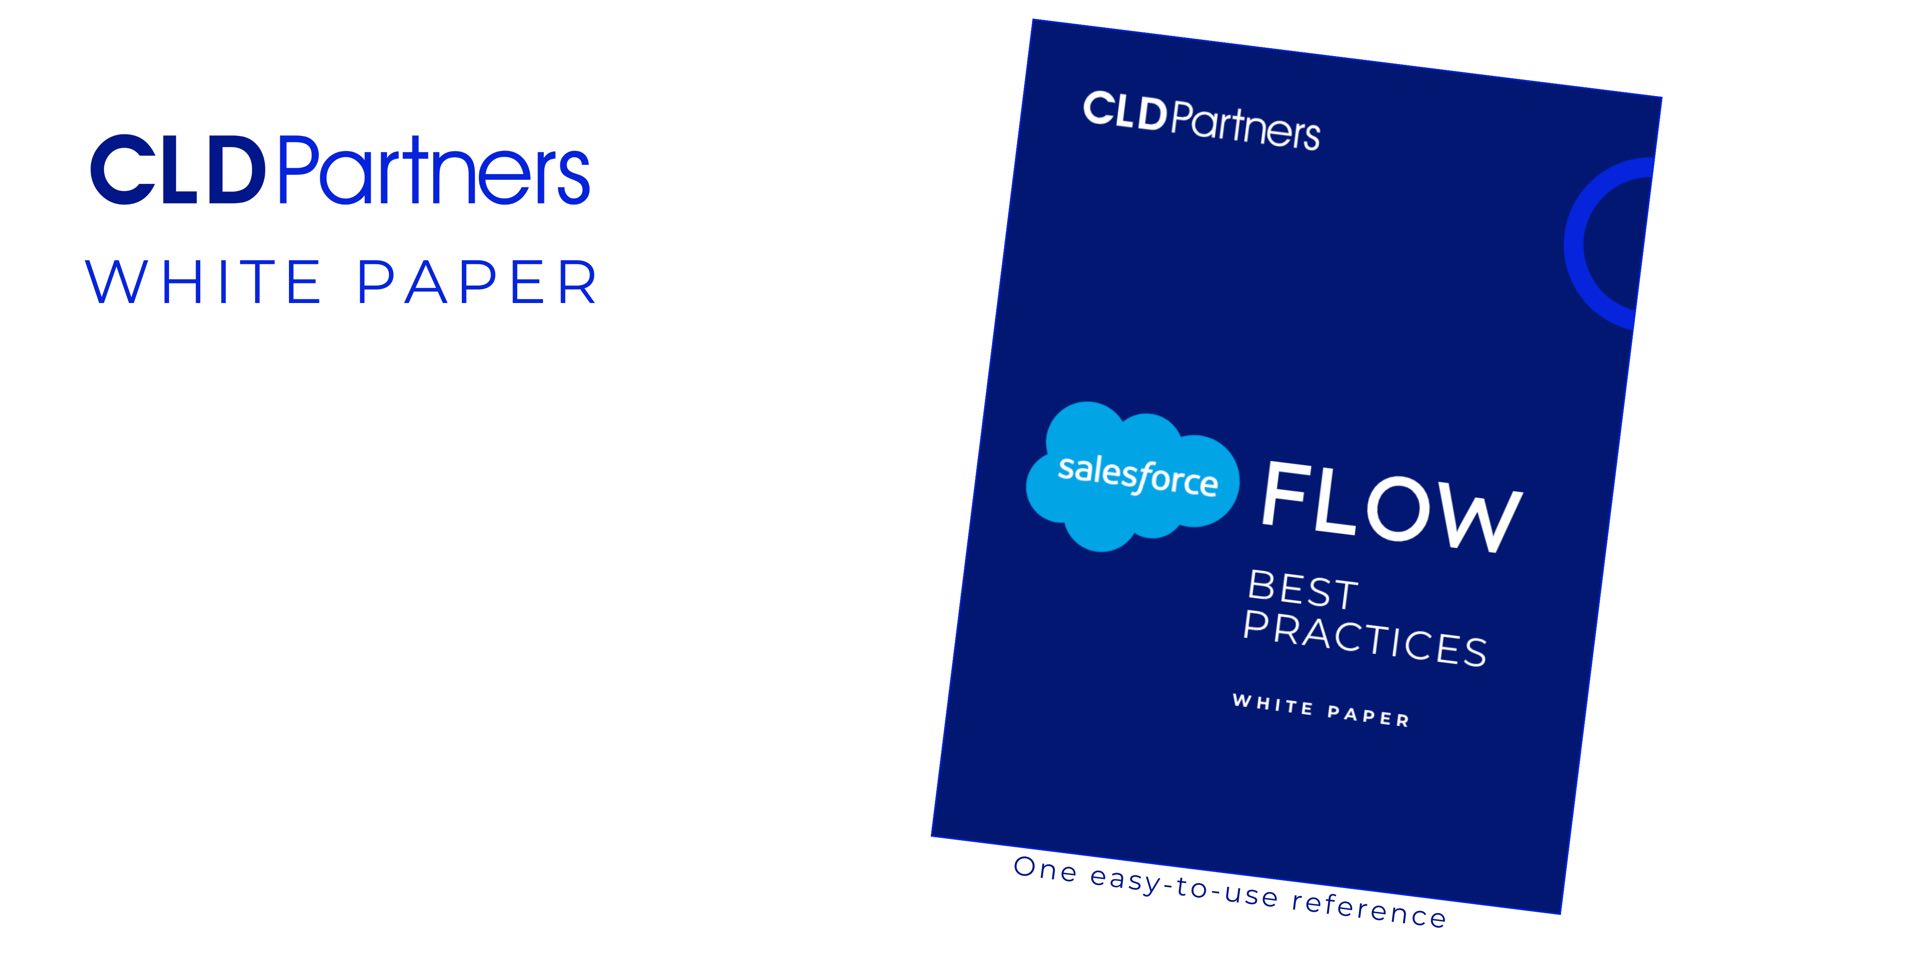 CLD White paper on Salesforce Flow Best Practices all in one easy-to-use Reference.